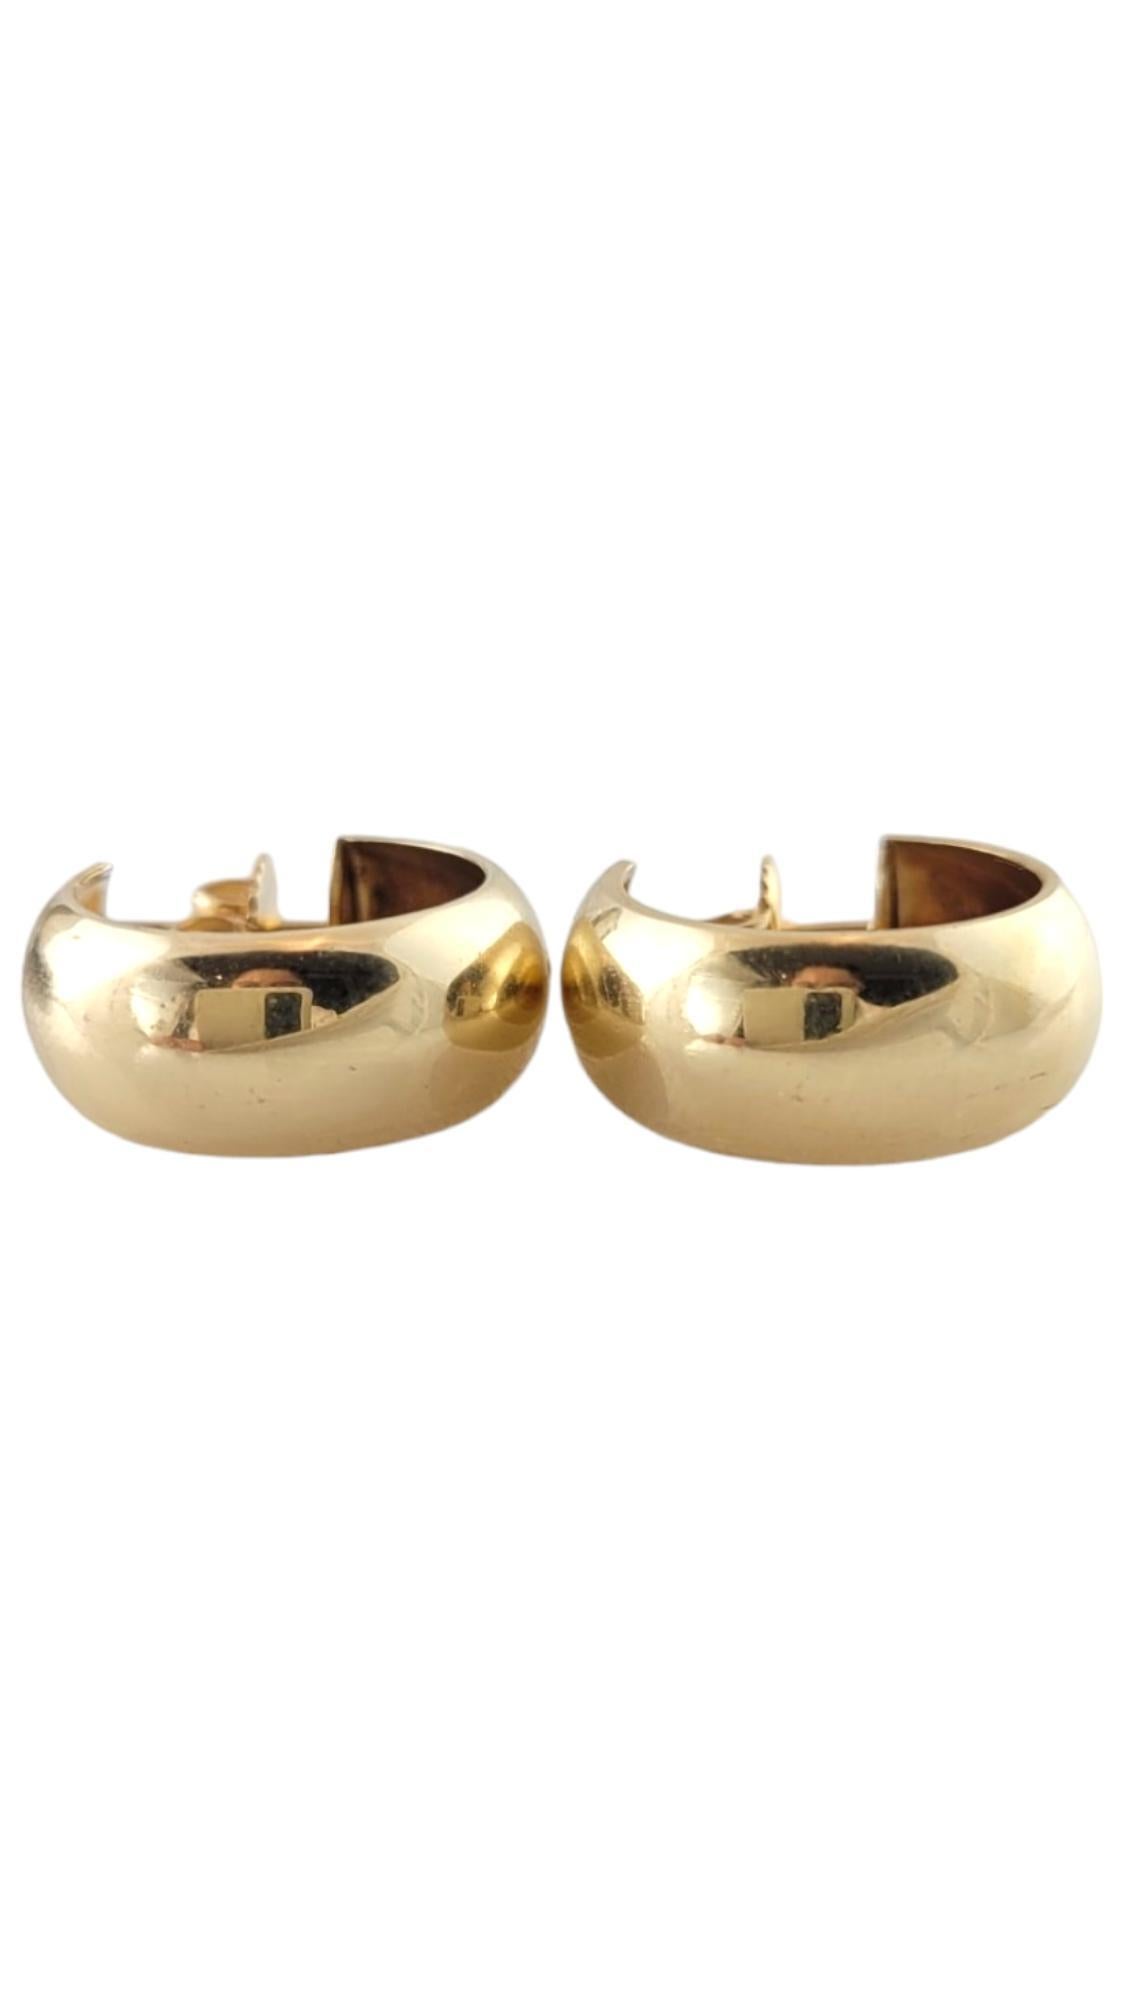 14K Yellow Gold Wide Hoop Earrings

These adorable 14K yellow gold hoops are a classic set that will look gorgeous on anyone!

Diameter: 17.15mm
Width: 7.07mm

Weight: 3.0 dwt/ 4.60 g

Hallmark: M14K

Very good condition, professionally